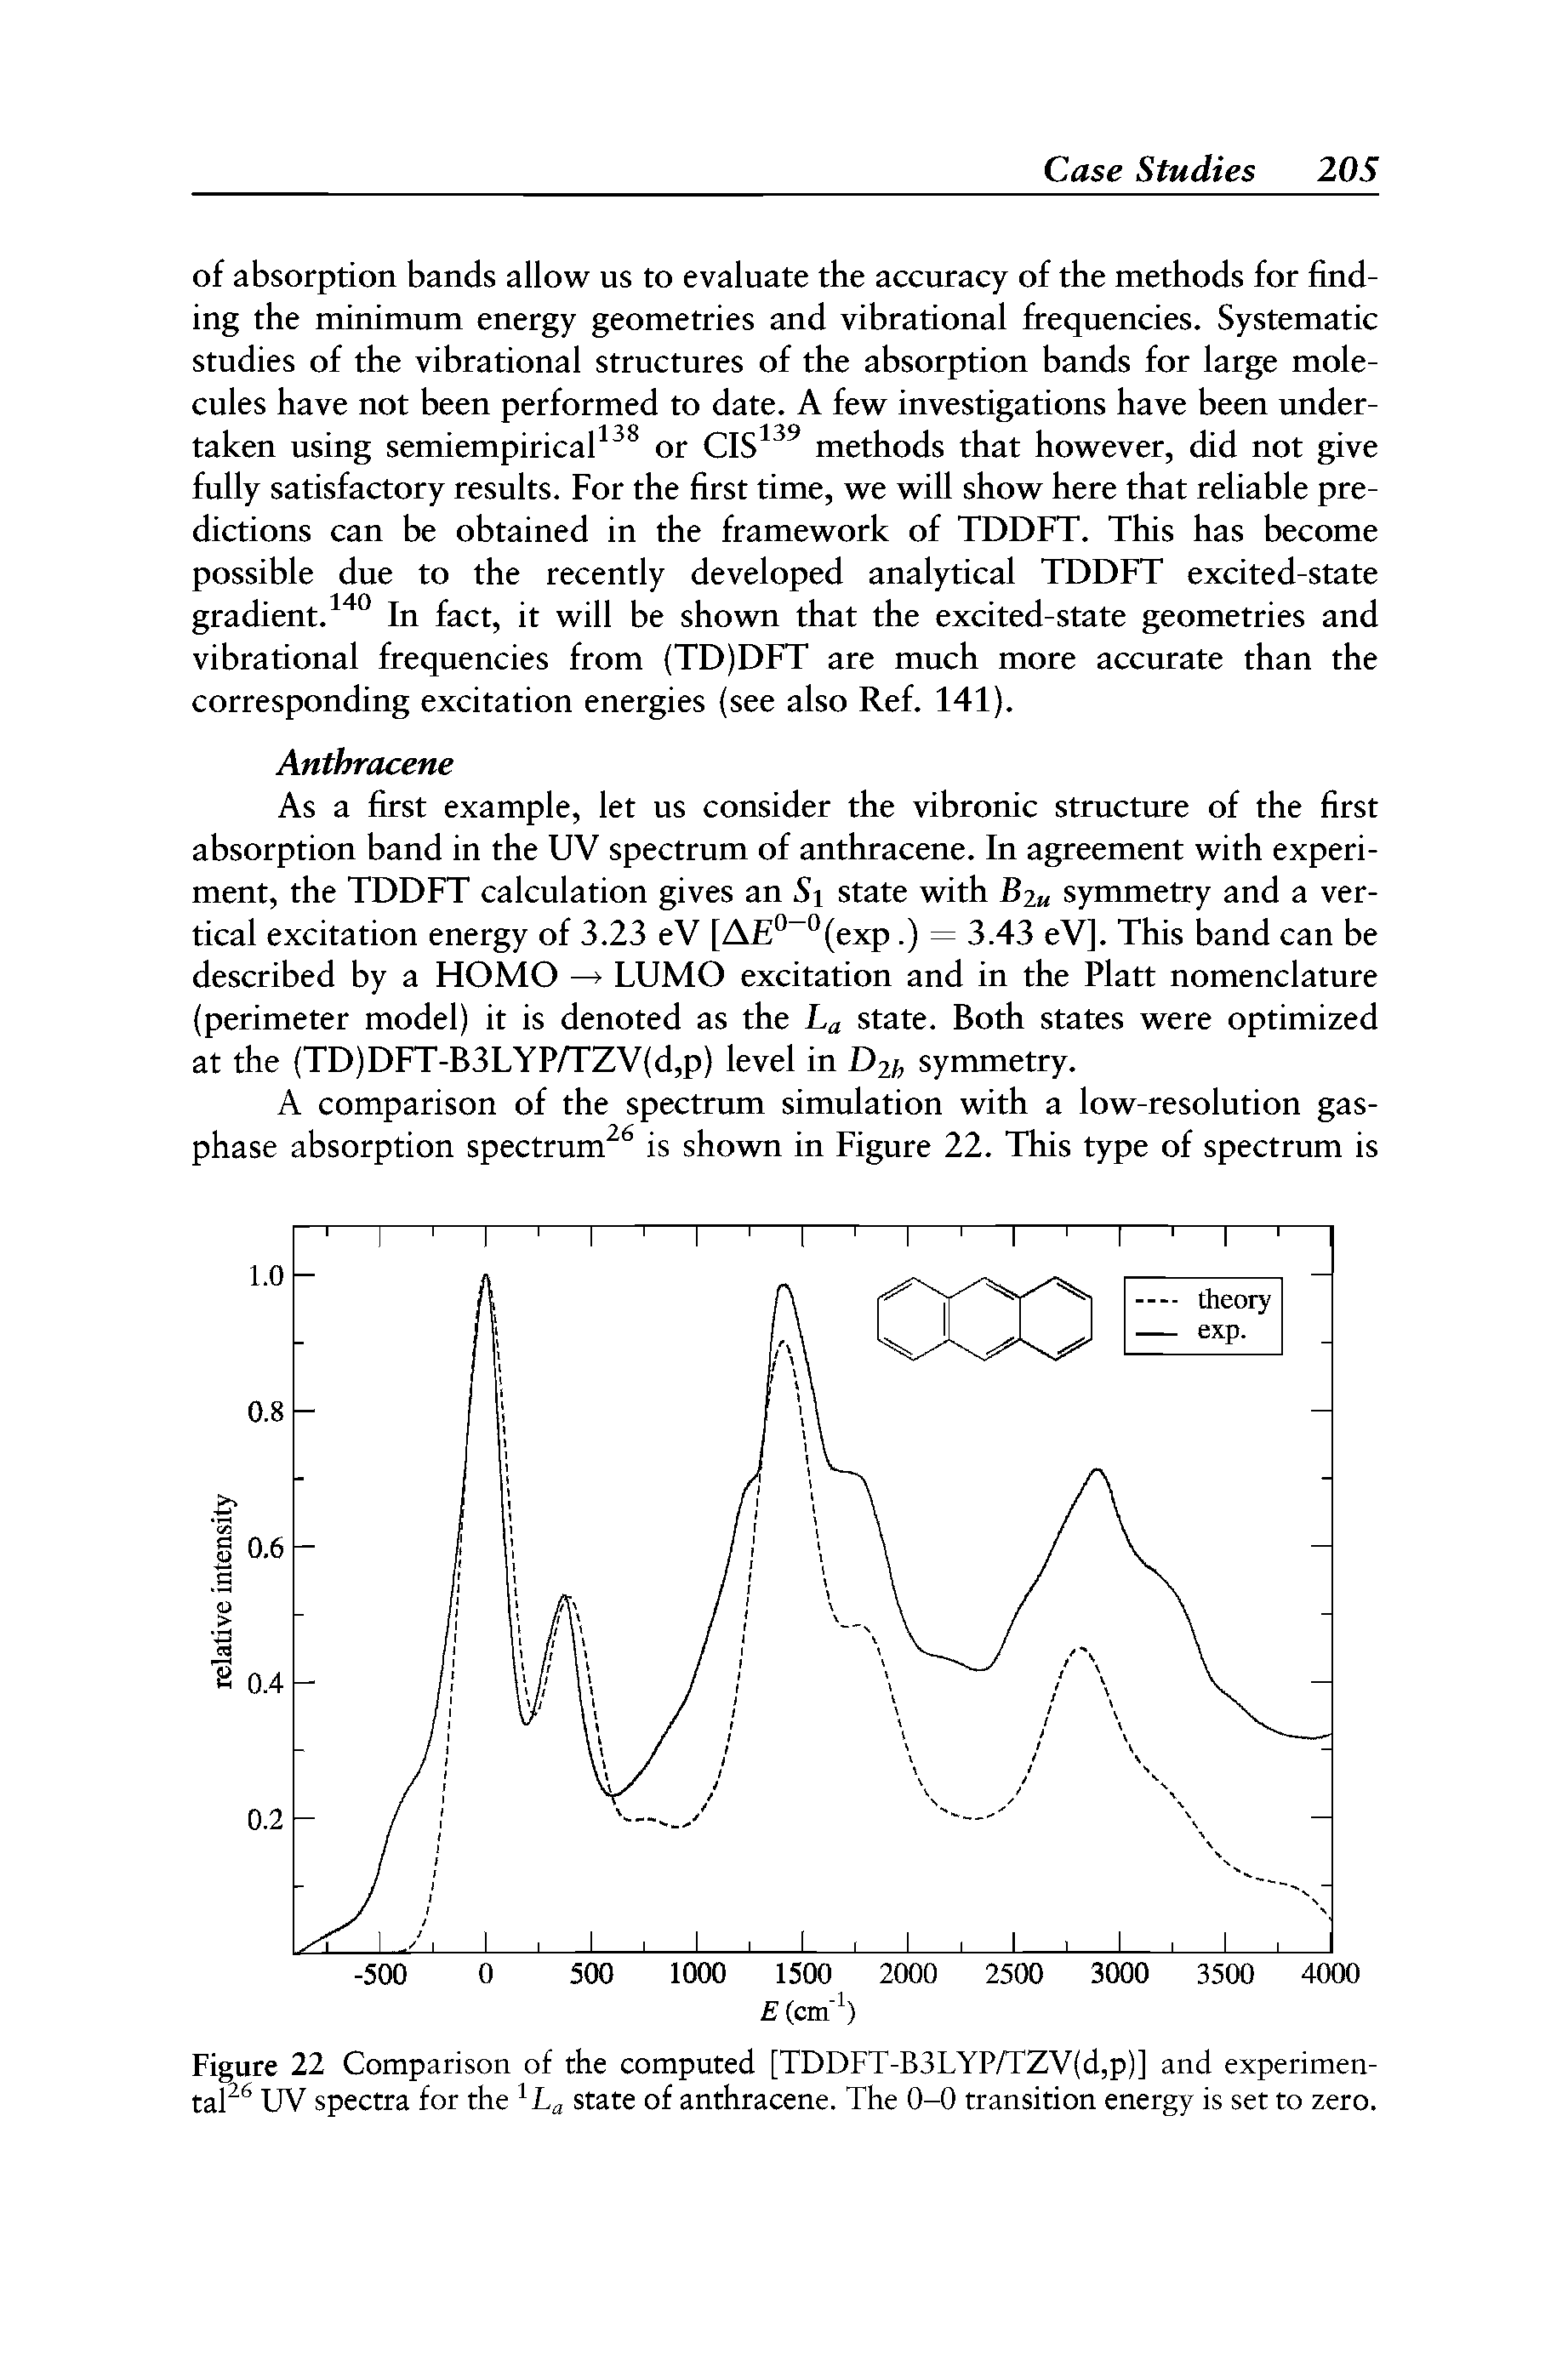 Figure 22 Comparison of the computed [TDDFT-B3LYP/TZV(d,p)] and experimental UV spectra for the state of anthracene. The 0-0 transition energy is set to zero.